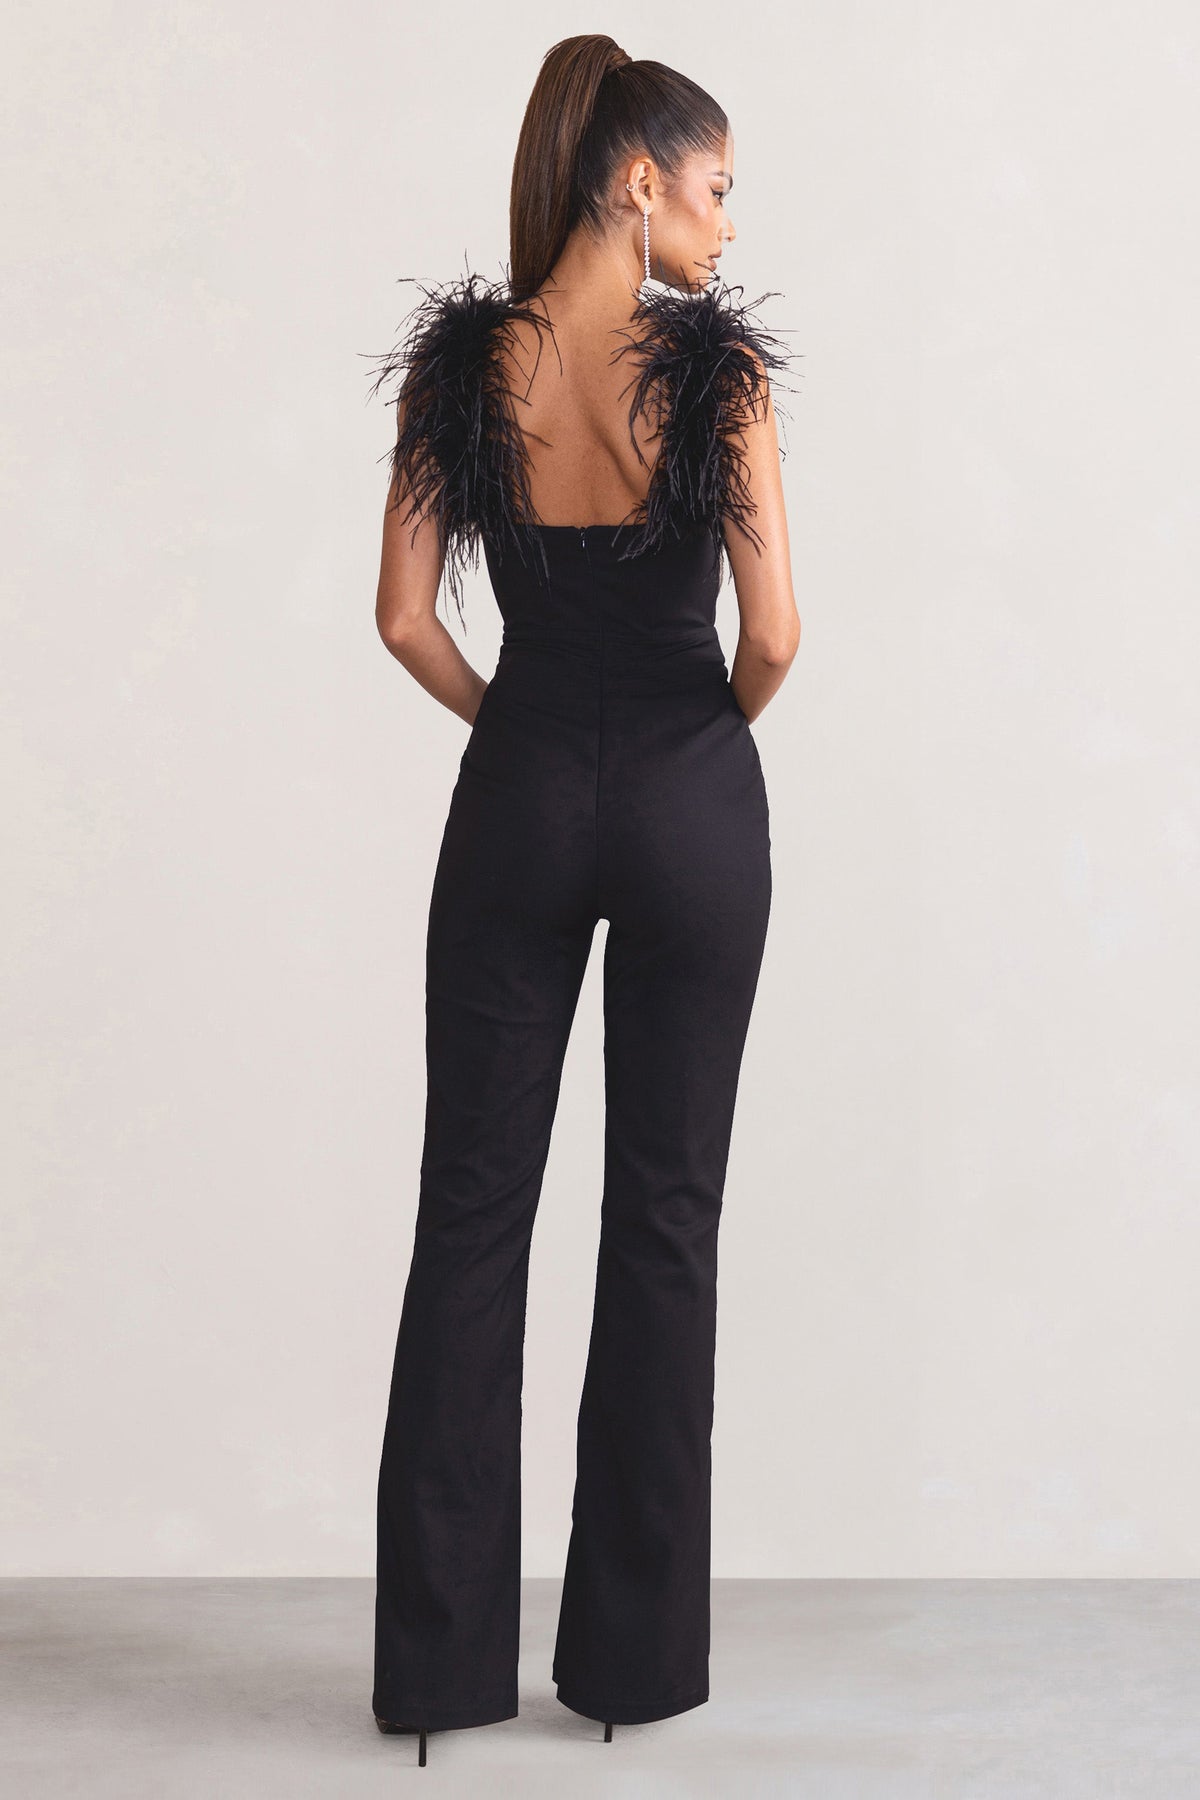 Heartbreak structured corset jumpsuit with cut out waist in black